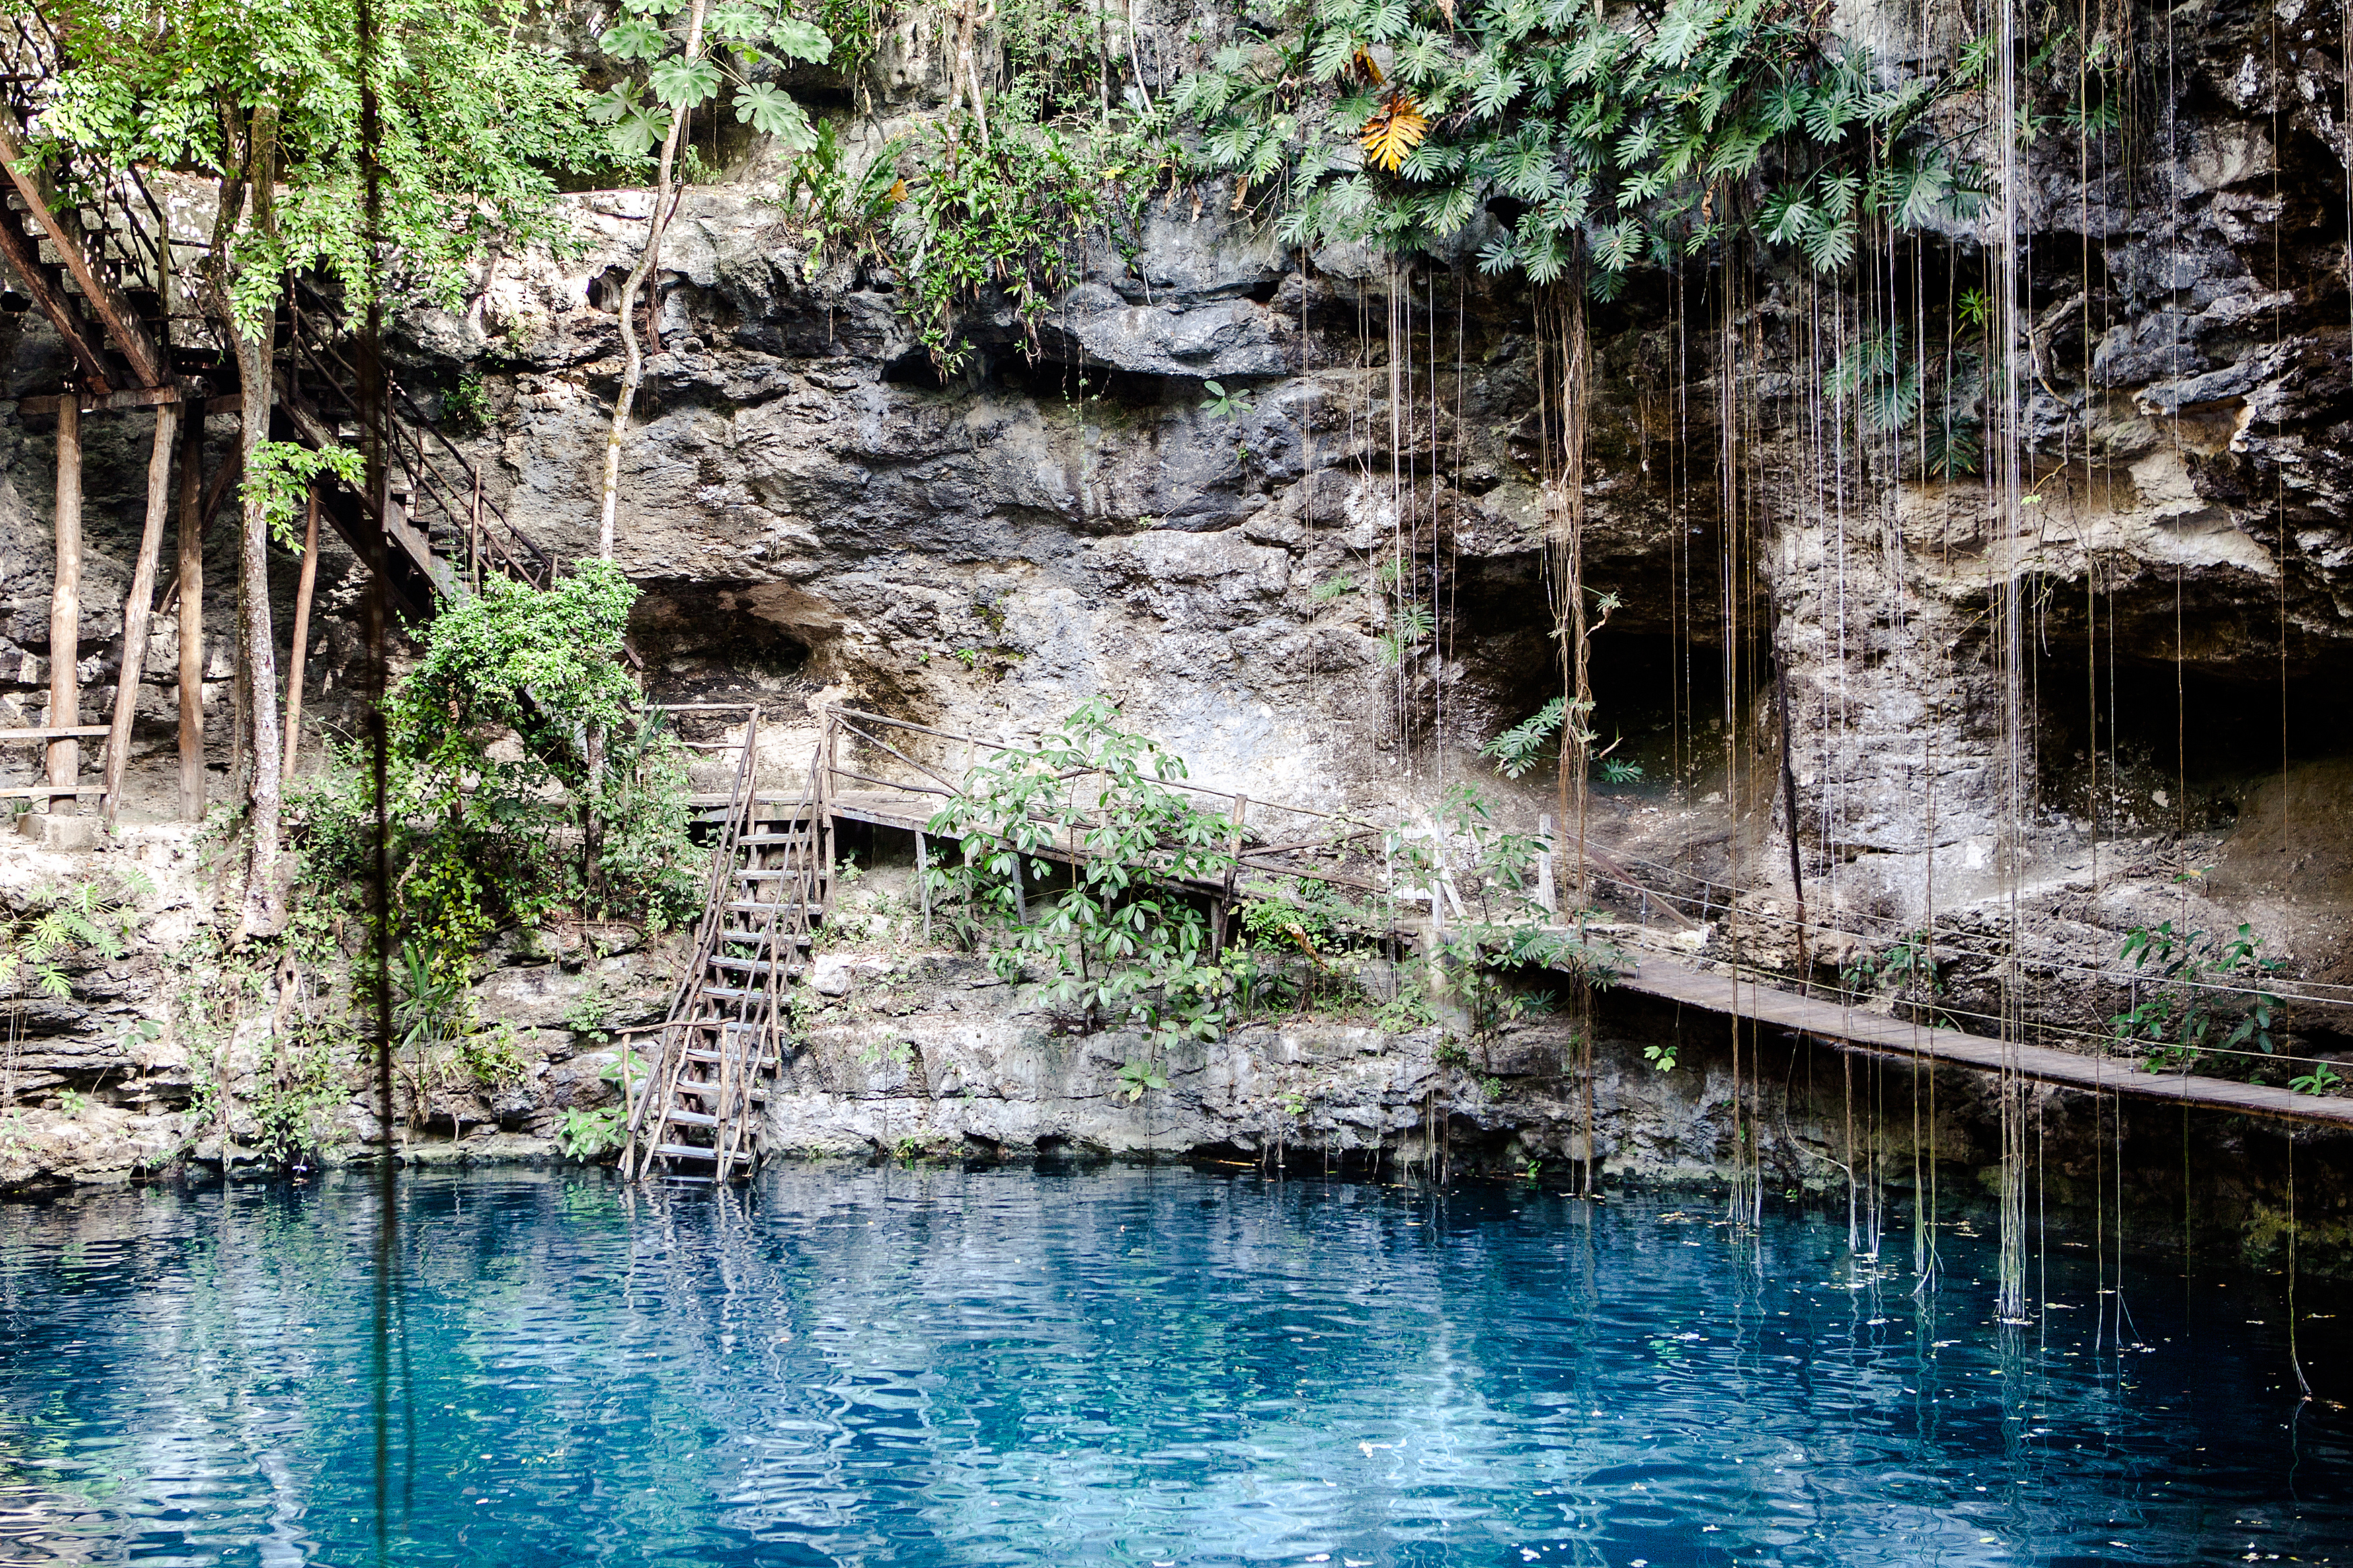 Springs vacations to plan now - Cenote in Riviera Maya